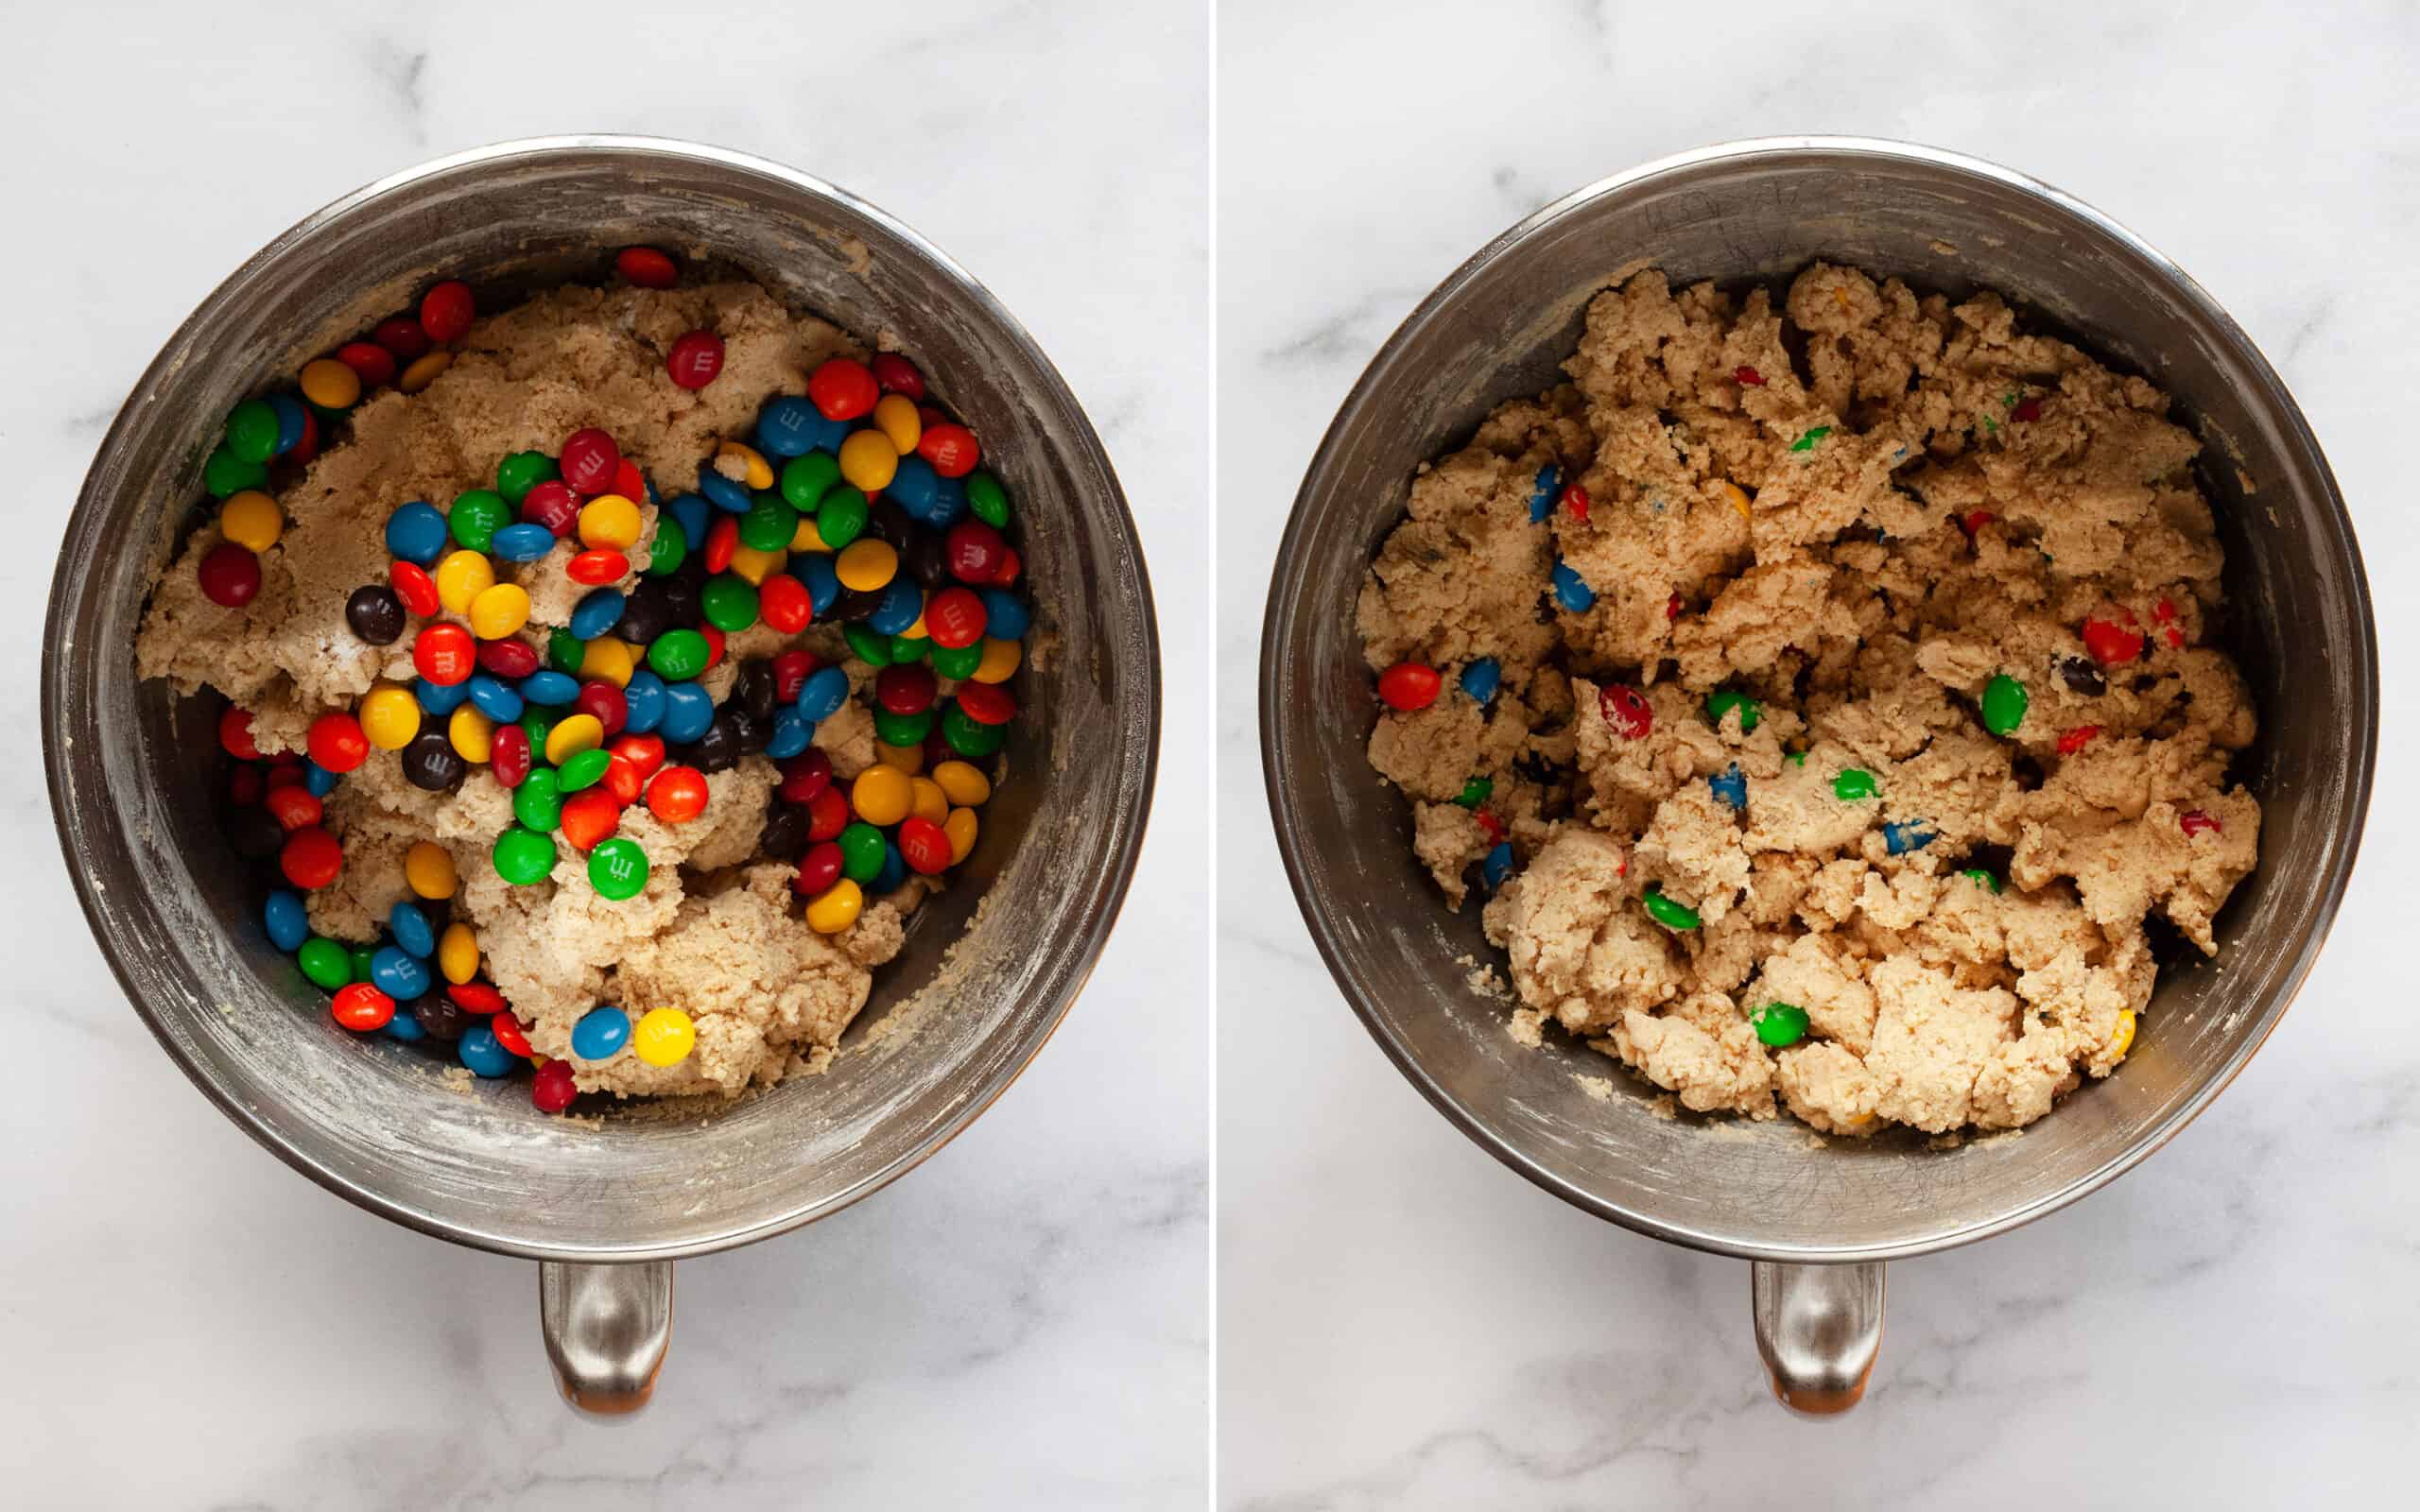 Before and after: stir the M&Ms into the peanut butter cookie dough.